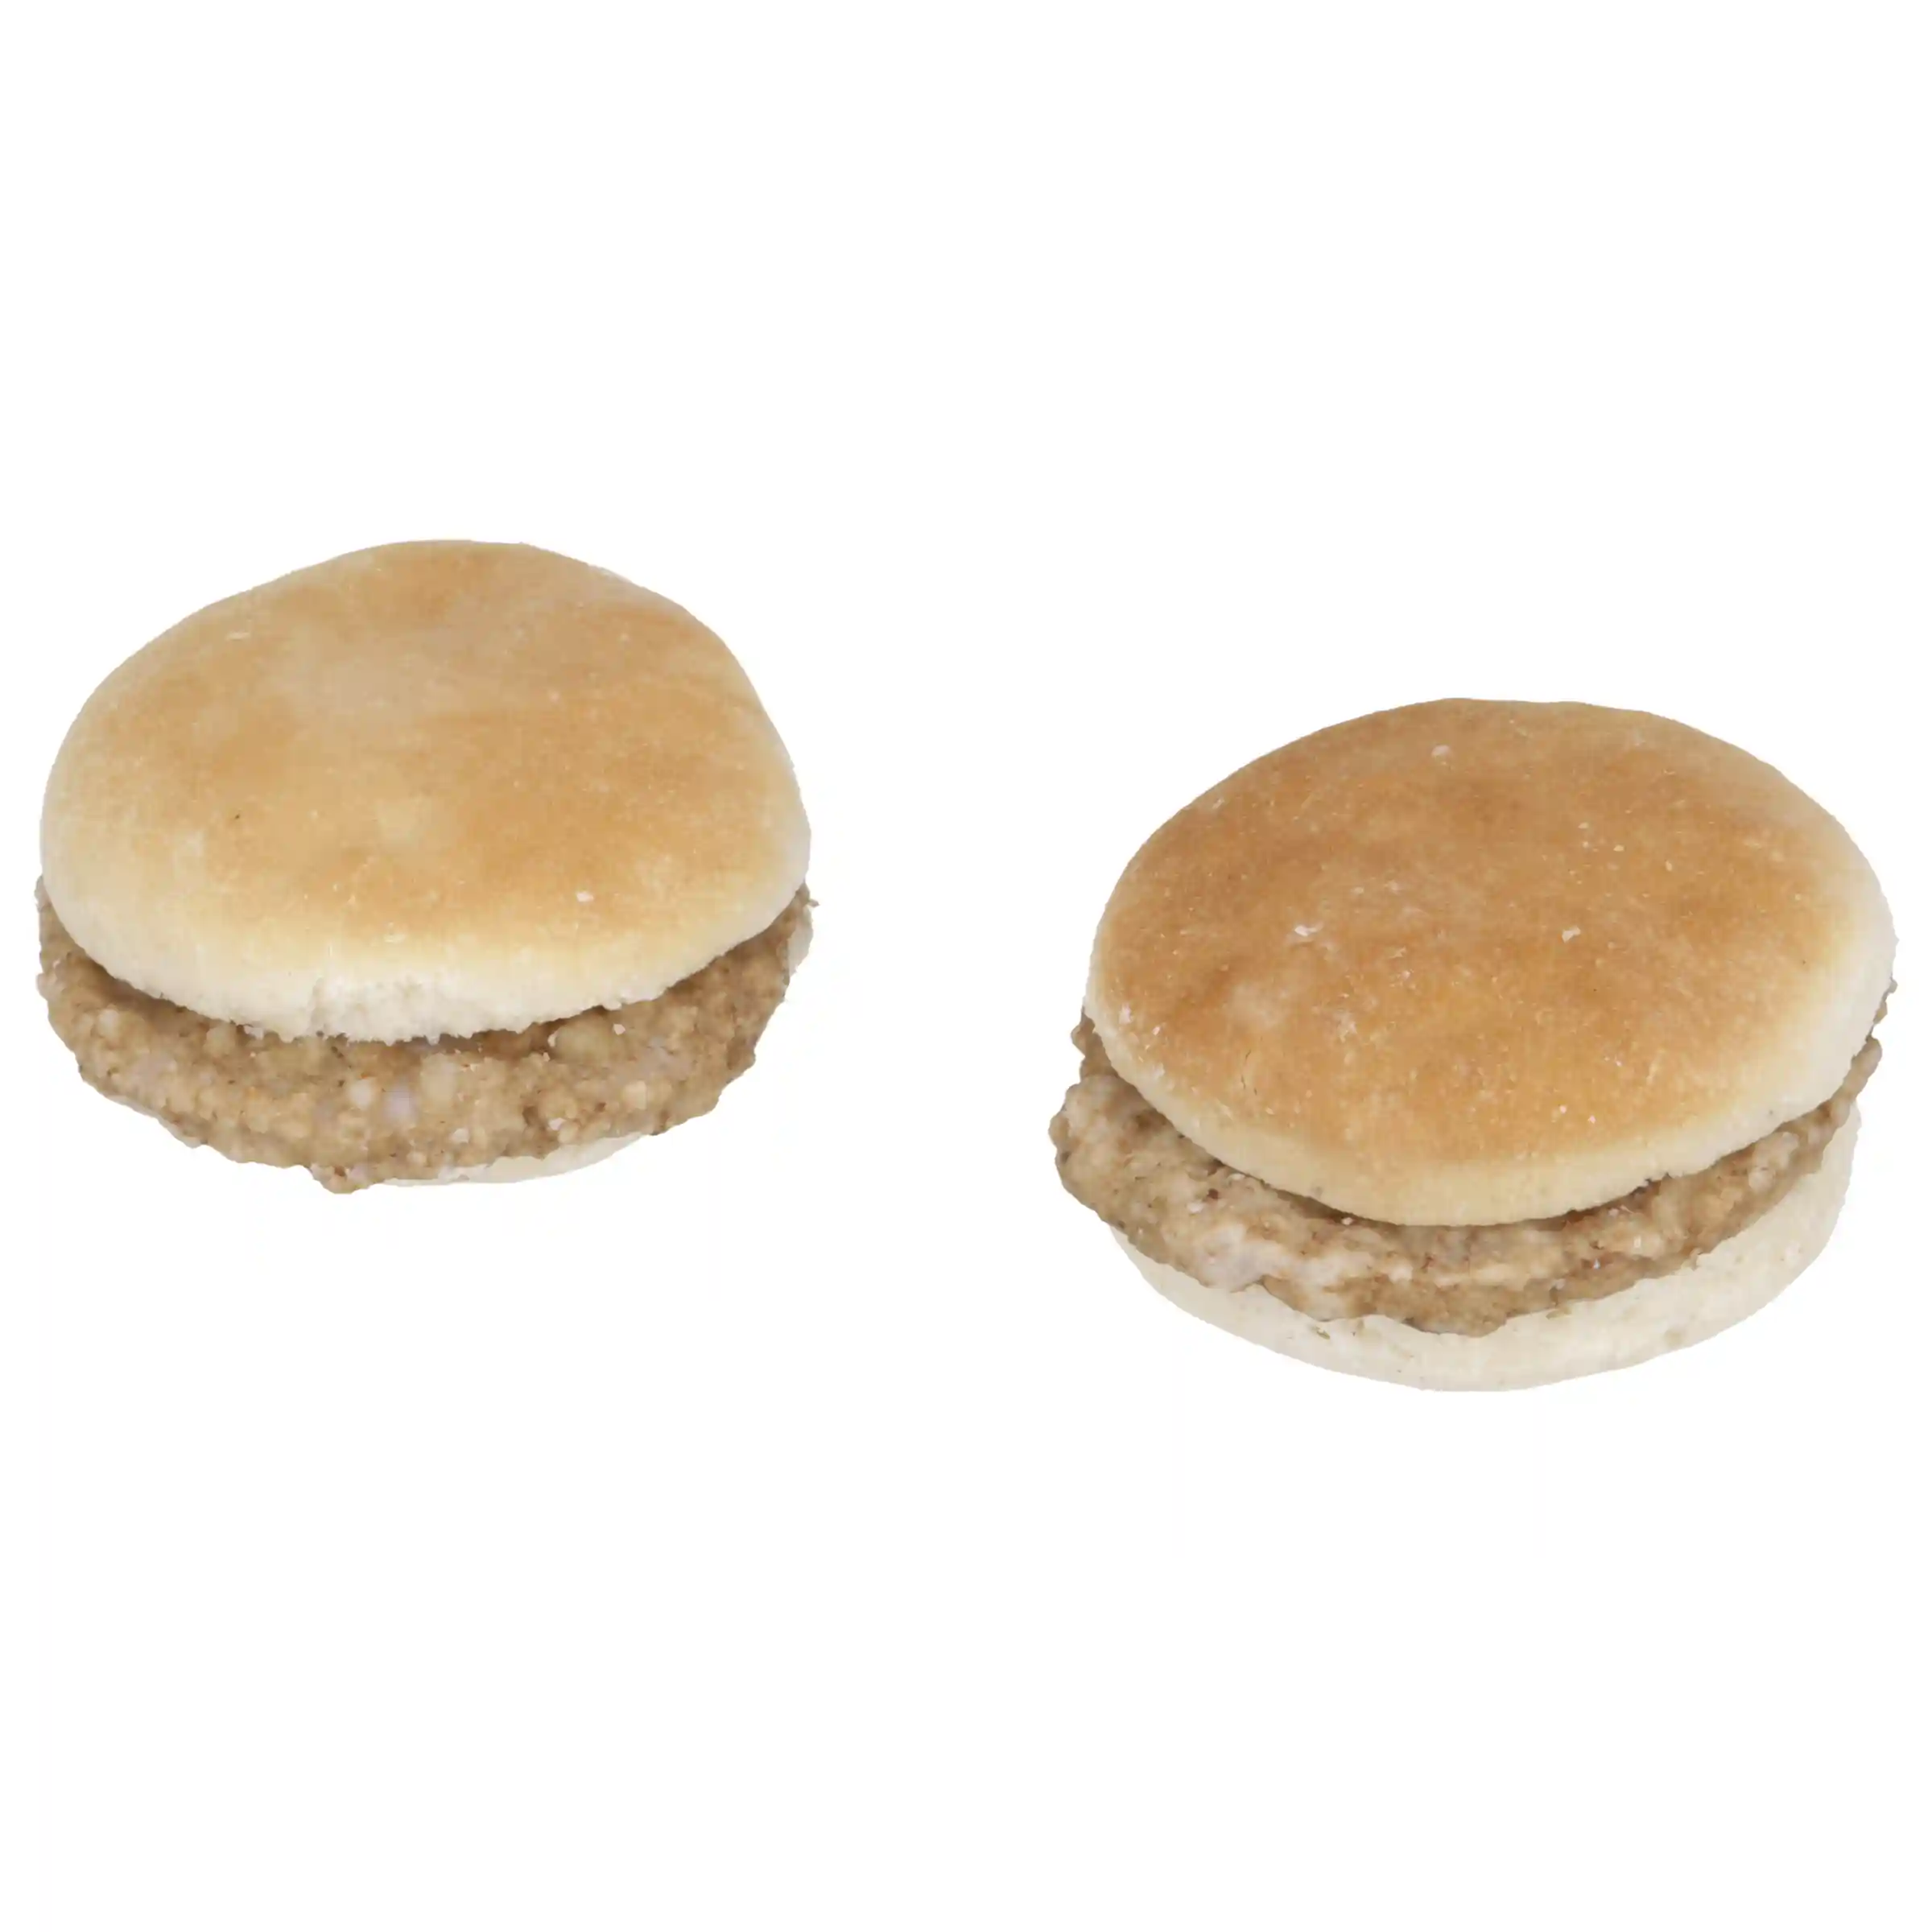 Rudy's Farm® Individually Wrapped Sausage Biscuit, Twin Packhttps://images.salsify.com/image/upload/s--EdBJPMEx--/q_25/zdkouj180icecpv5iuiy.webp